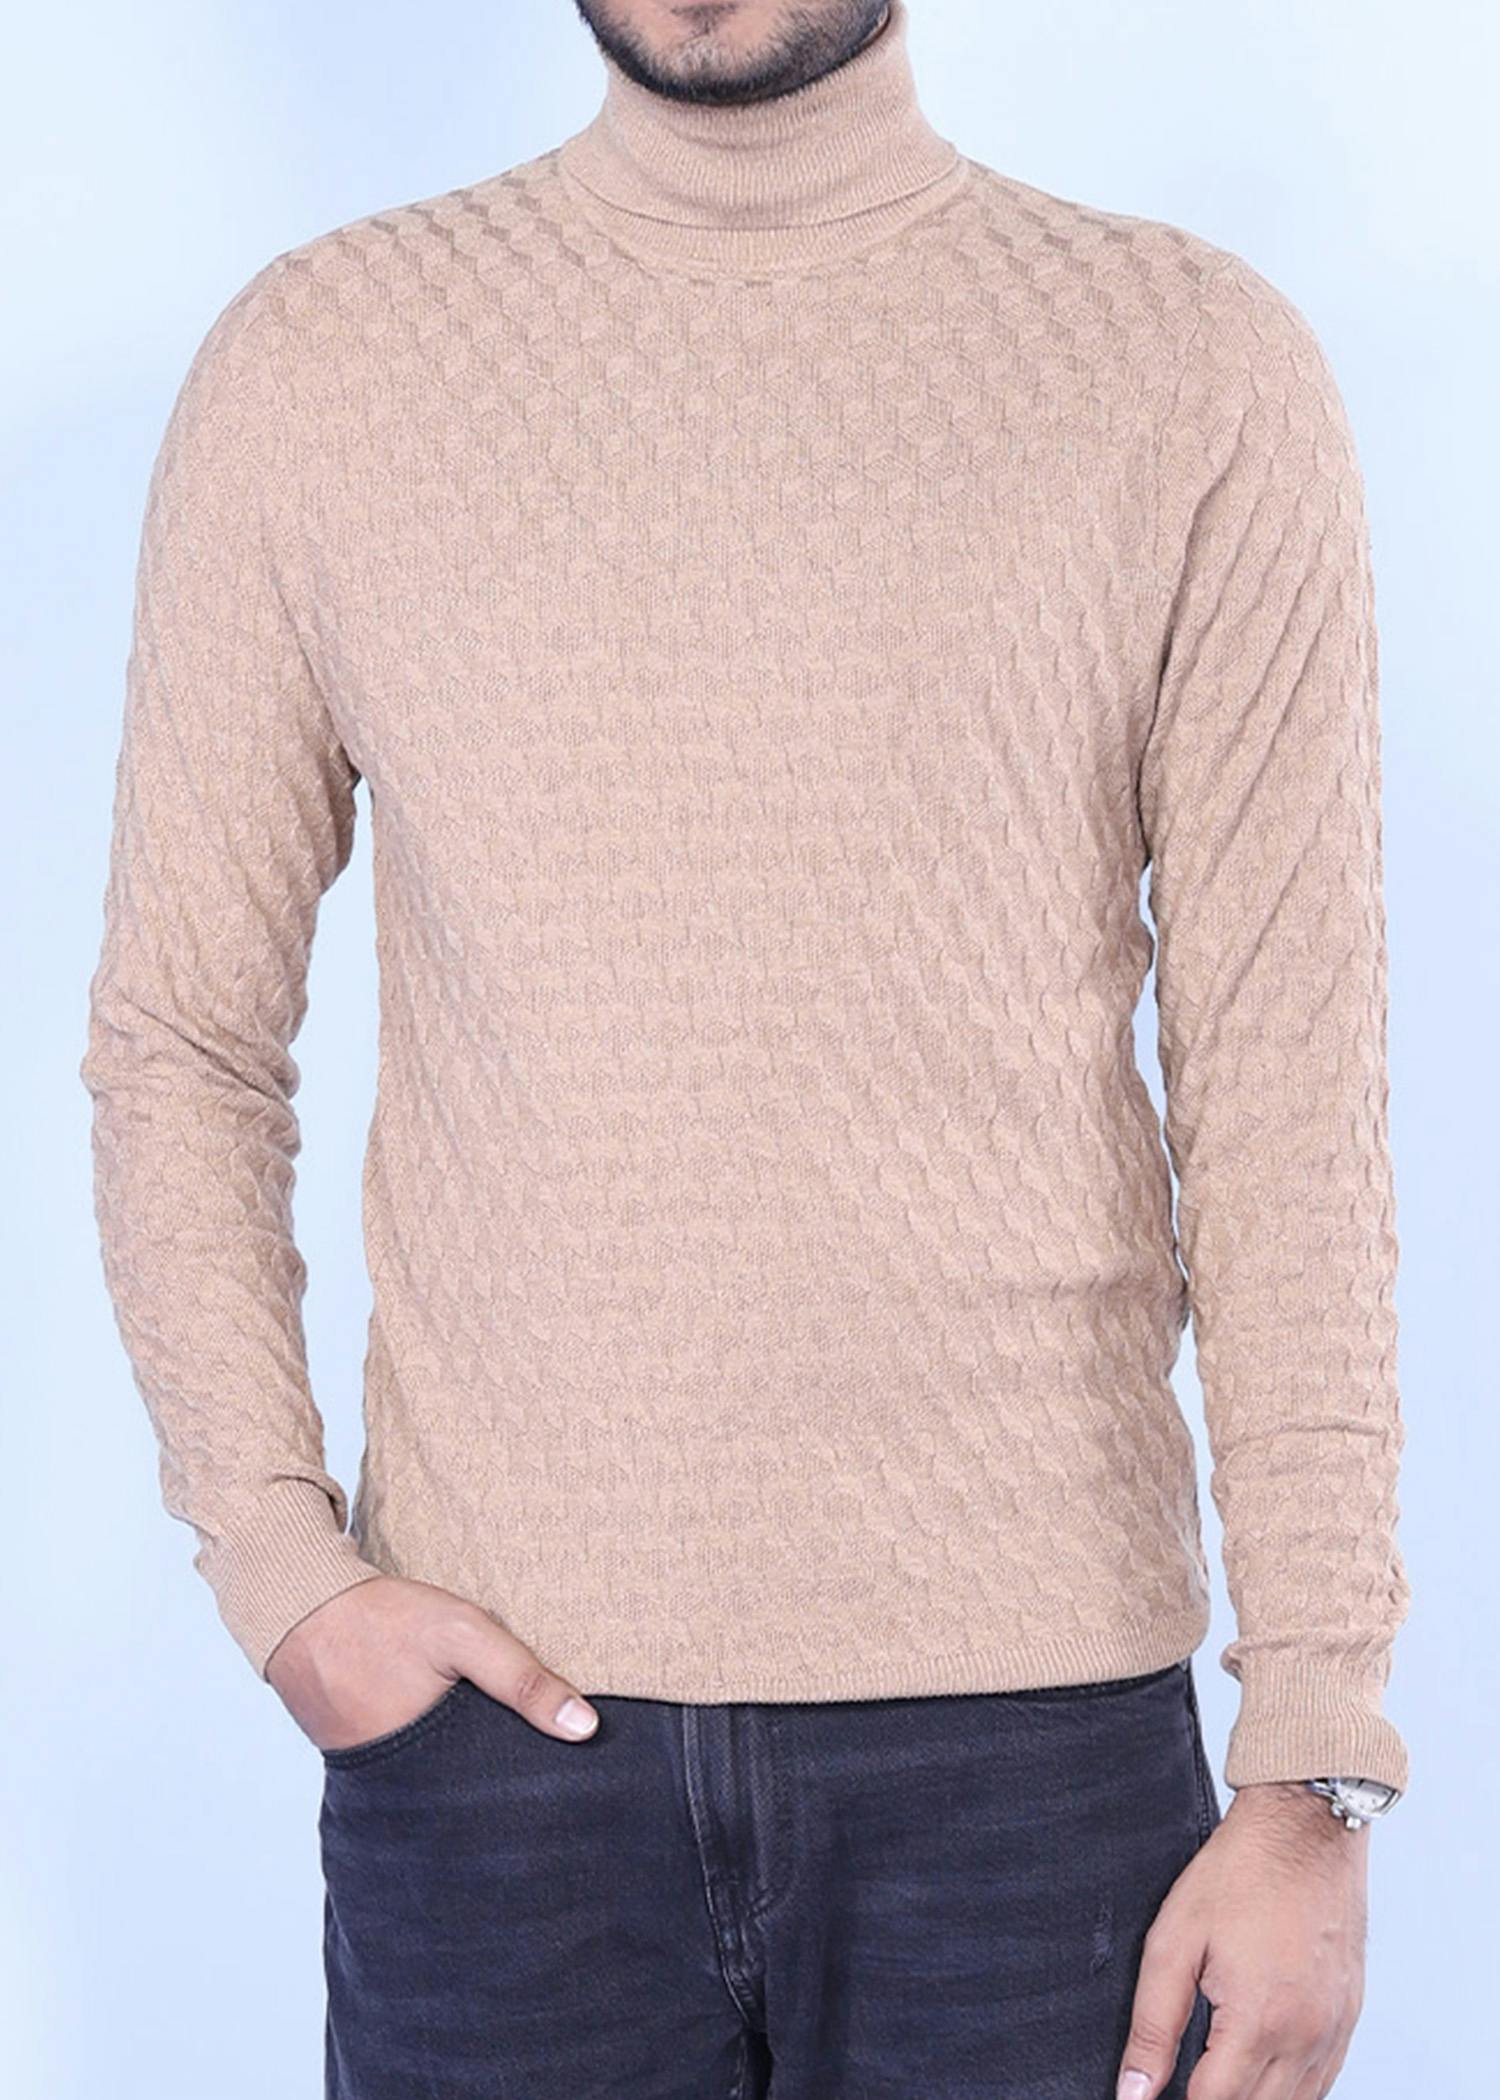 hornero ii sweater camel color headcropped